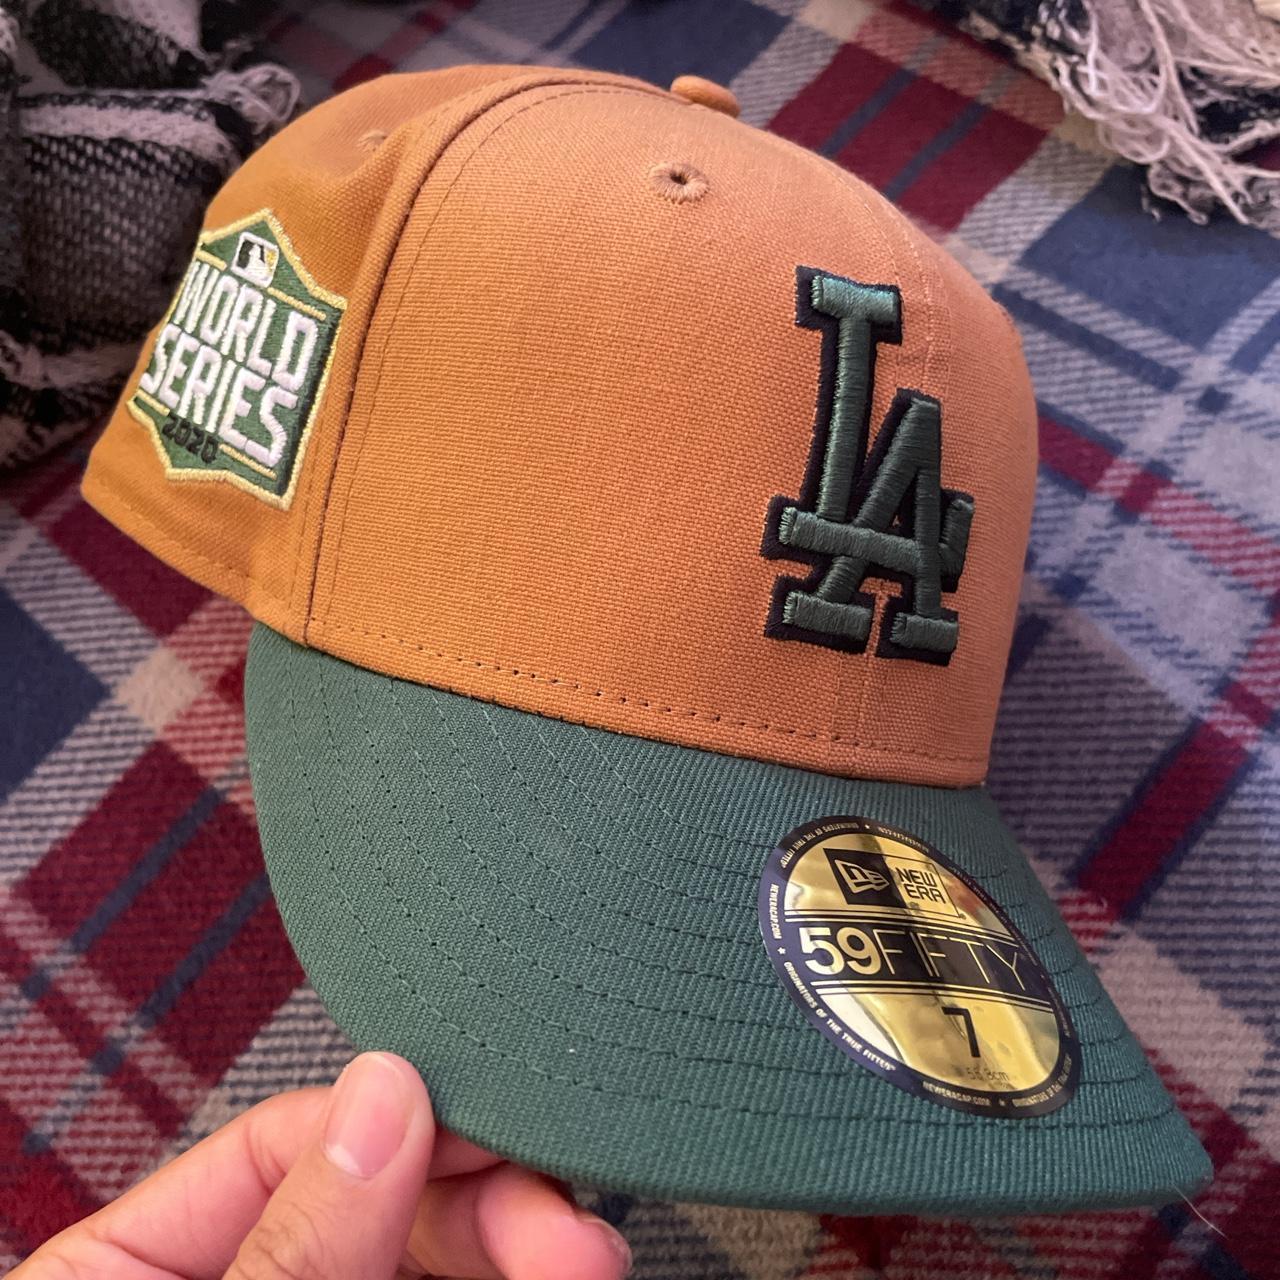 Los Angeles Dodgers BABY YODA Pro Image fitted hat - Depop